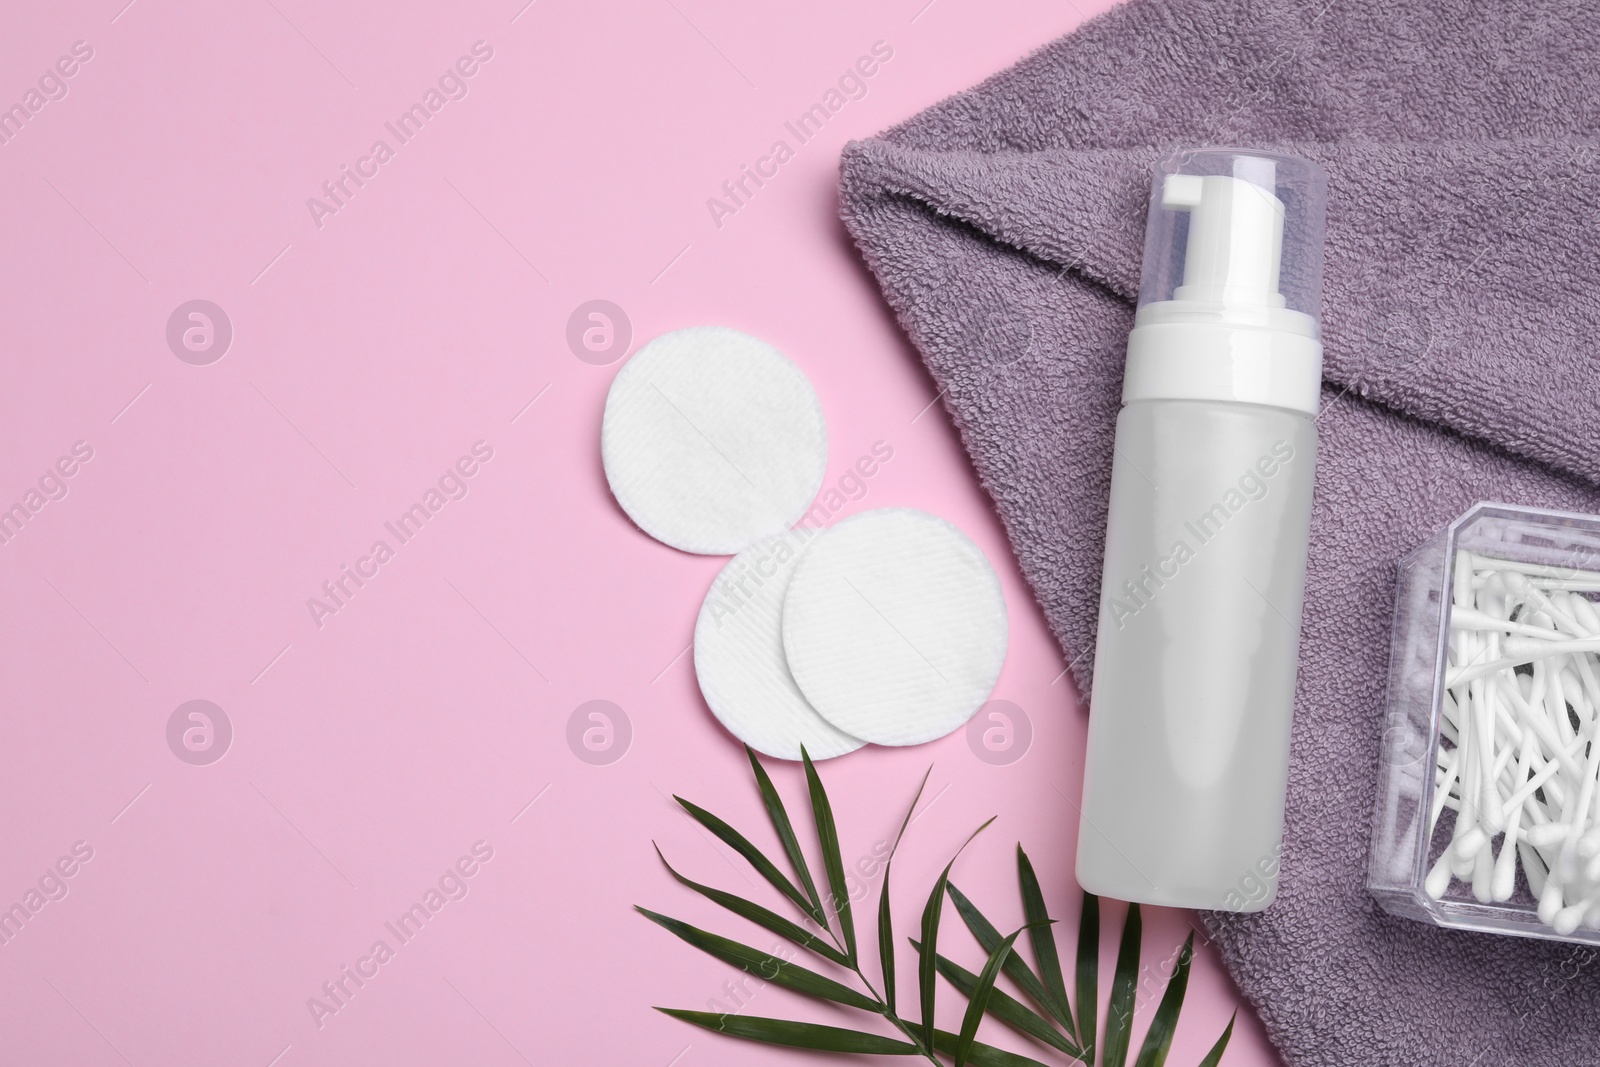 Photo of Bottle of face cleansing product, towel, cotton buds and pads on pink background, flat lay. Space for text